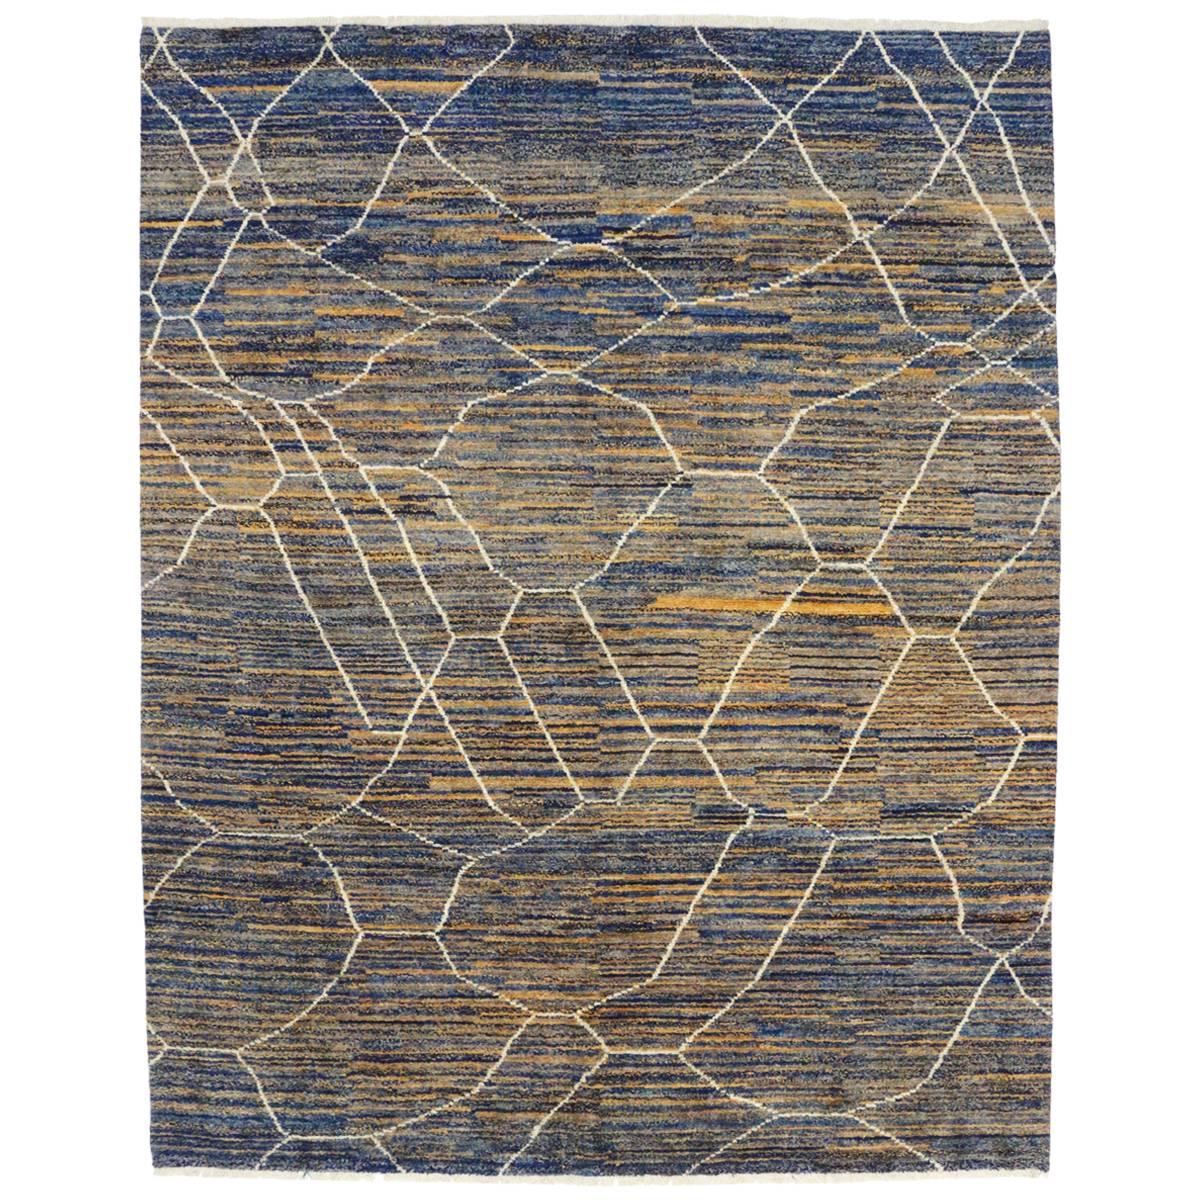 Contemporary Moroccan Style Area Rug with Abstract Design